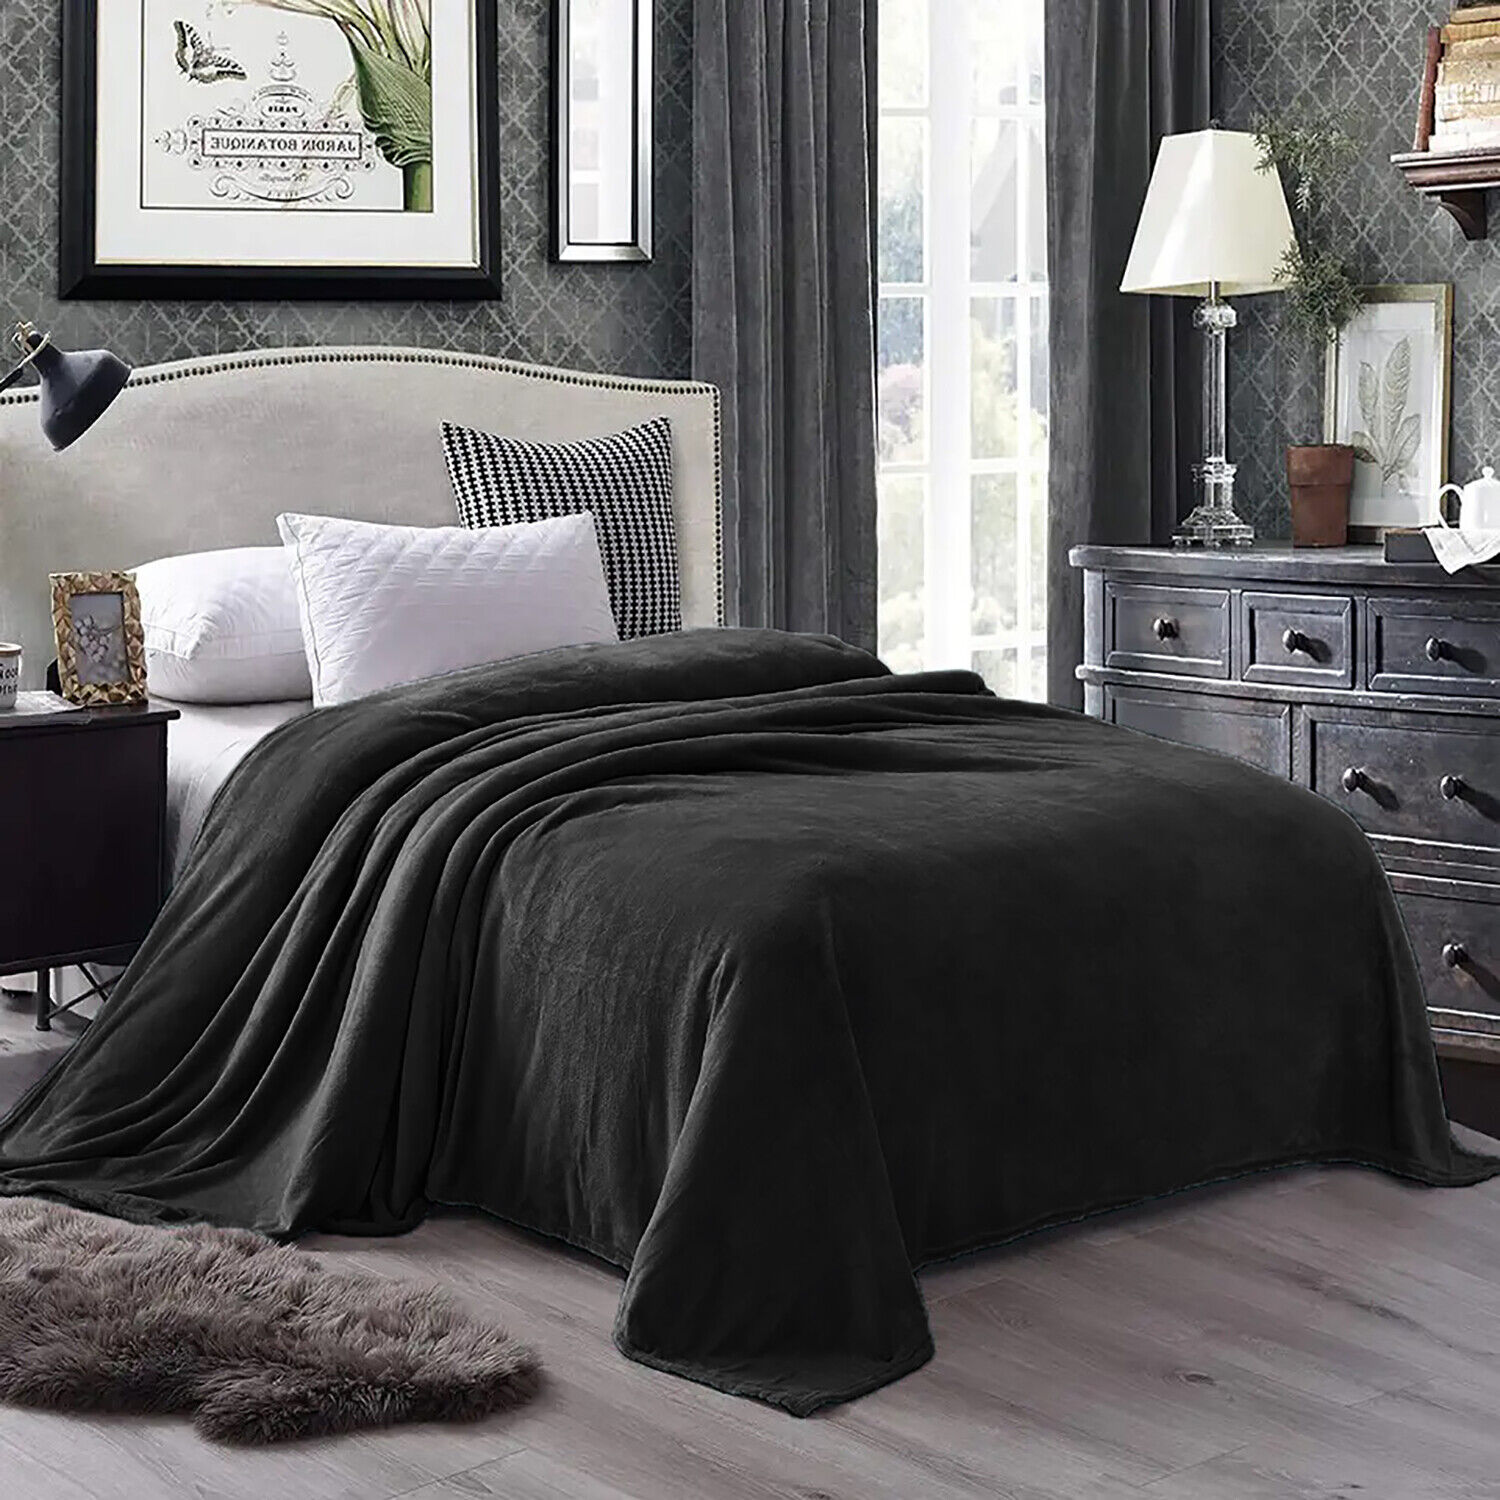 Home Mart Goods Black King Flannel Throw Plush Cozy Super Soft Cozy Warm Bed Blanket